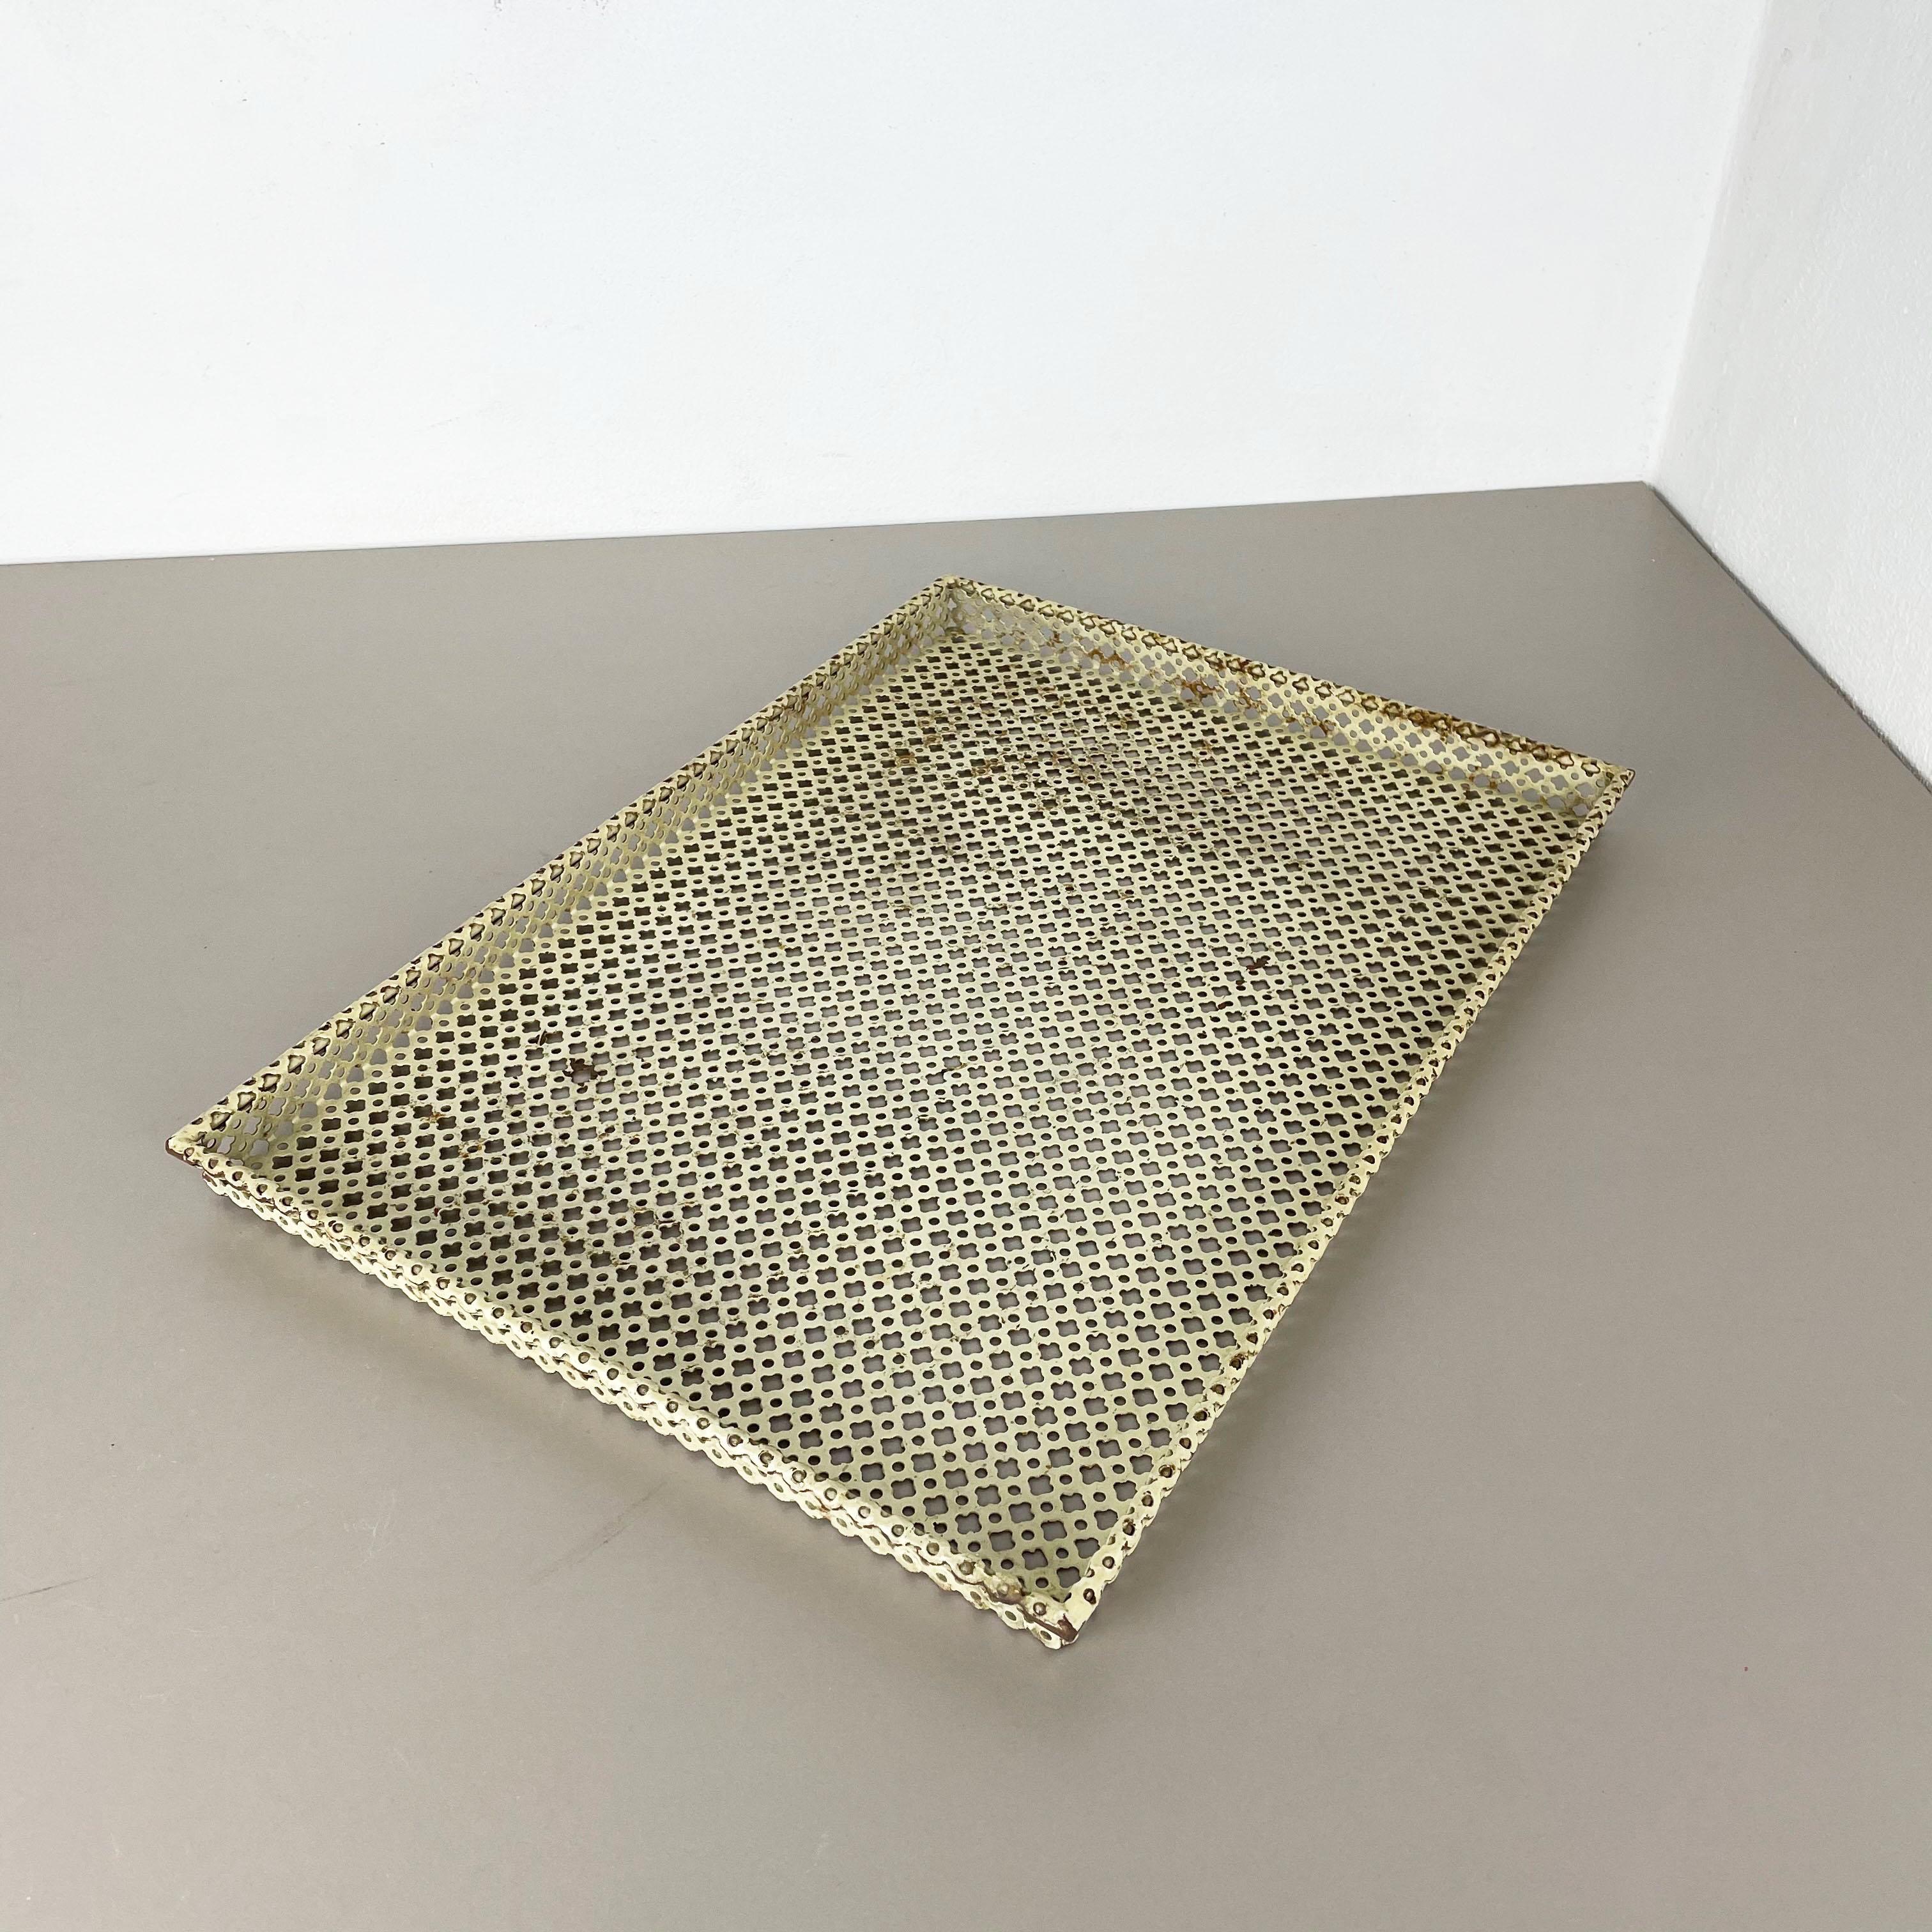 Metal tray.

attributed to be Designed and produced by Mathieu Matégot.

Origin: France, 

1950s.

Original Mathieu Matégot tray designed and manufactured in the 1950s in France. typical mategot style with perforated sheet metal, hole